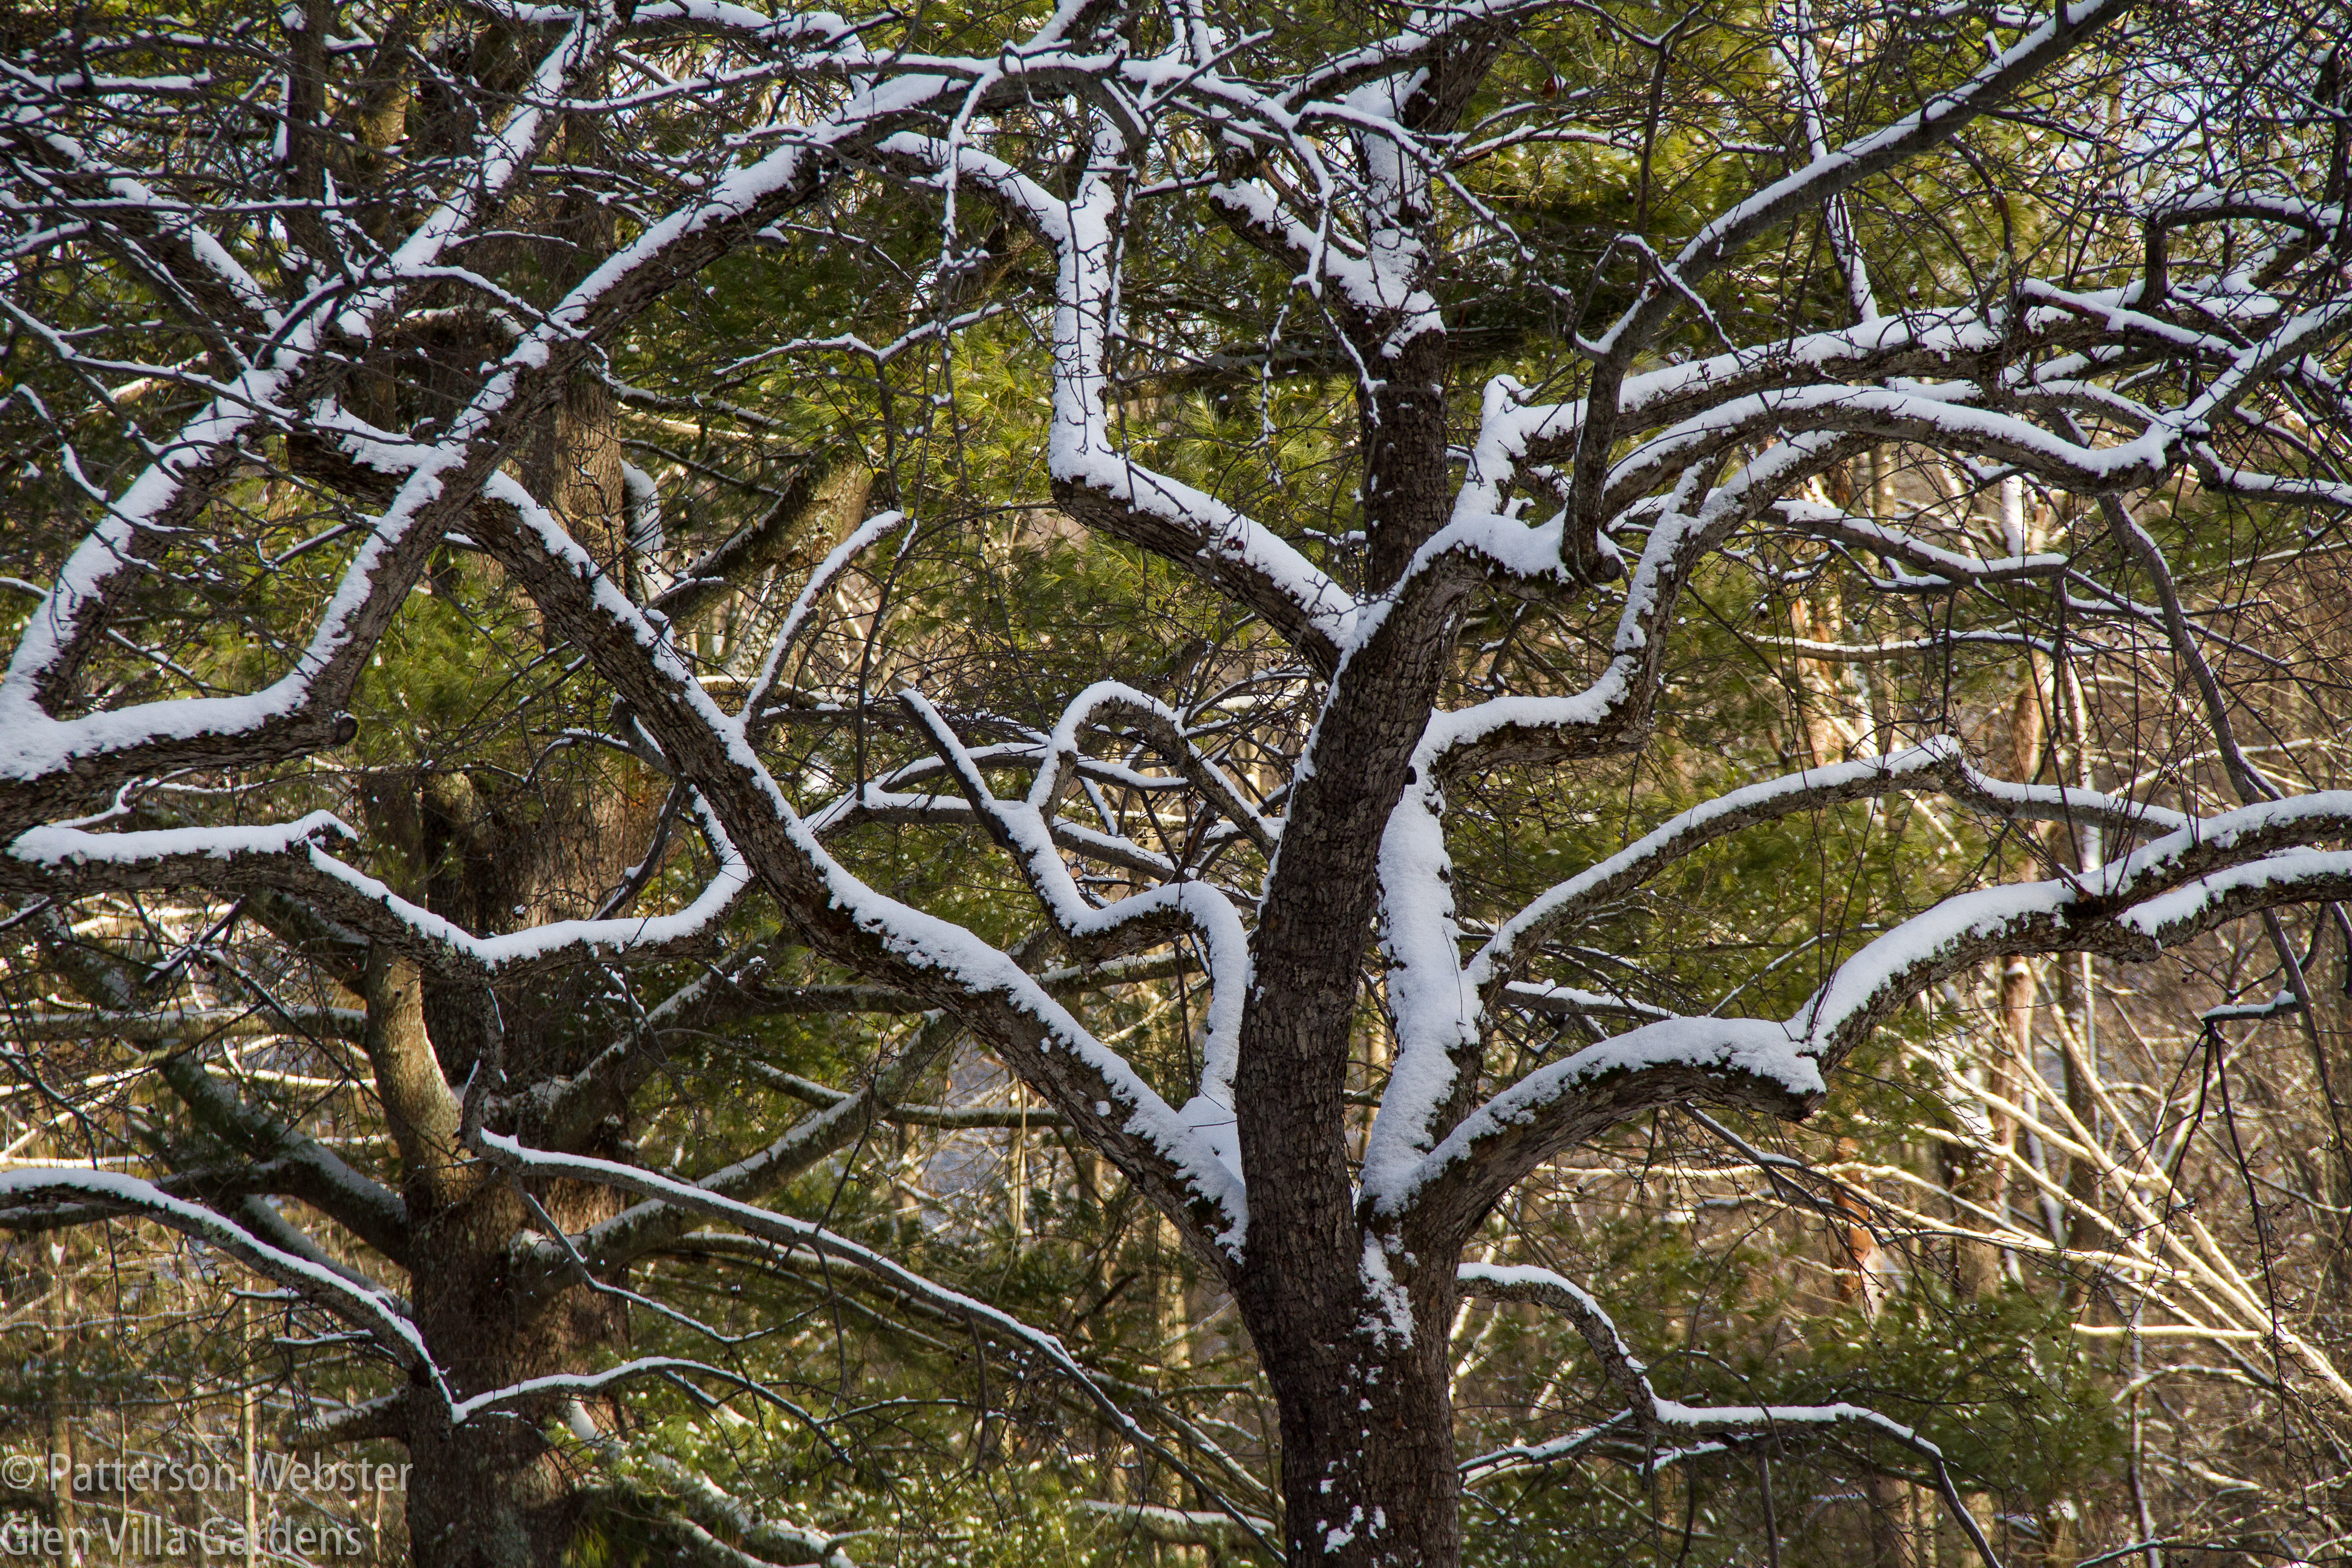 The shape of the crabapple tree becomes dramatic when outlined with snow.